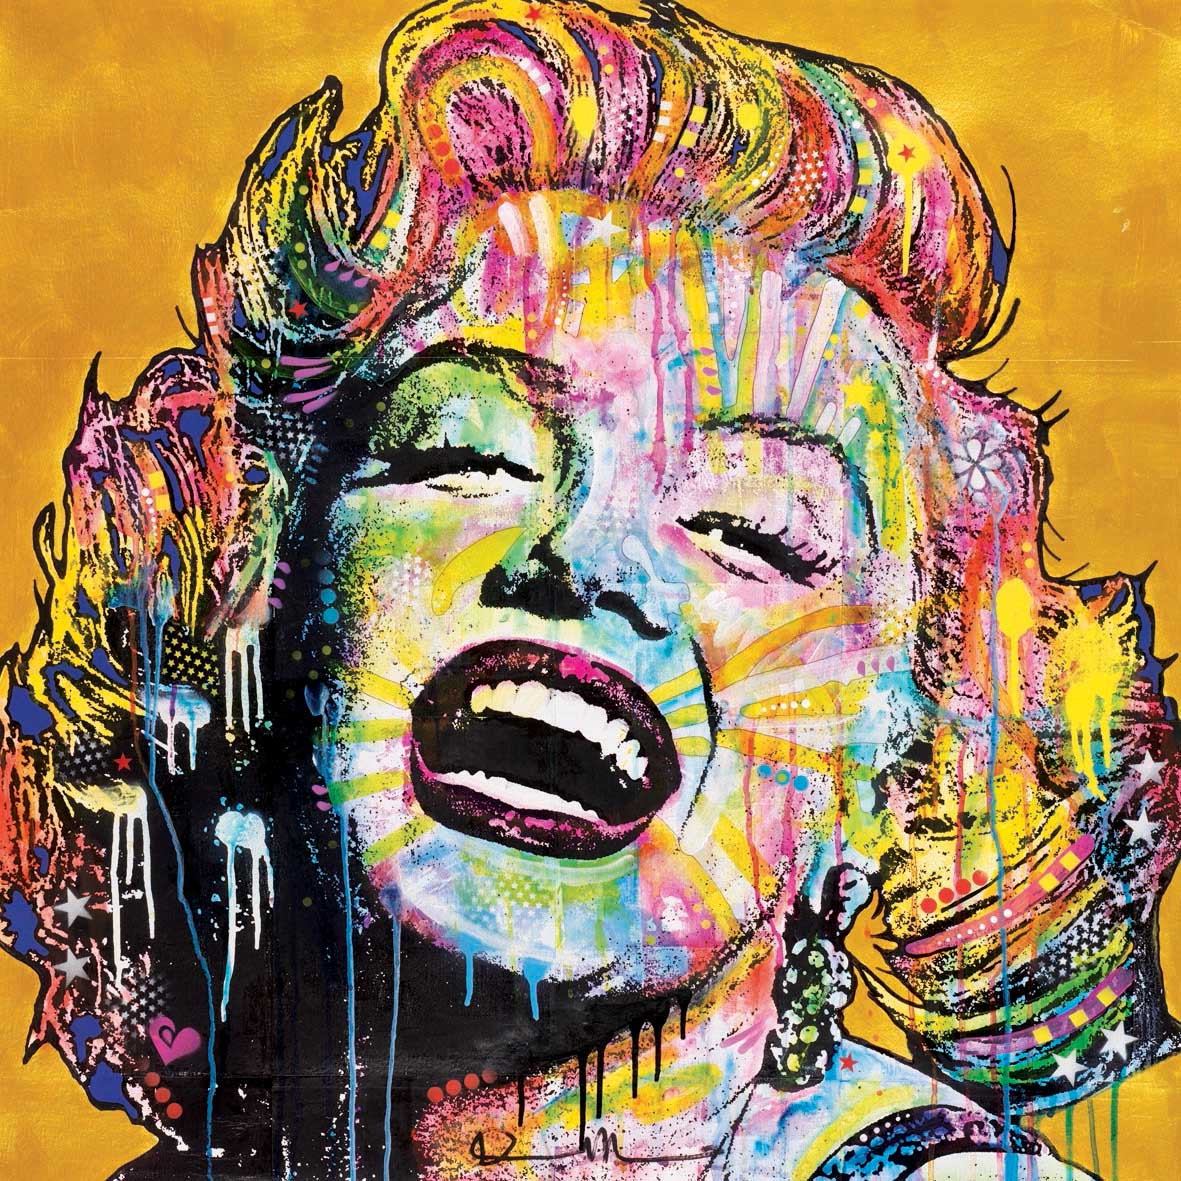 Marilyn Famous People Jigsaw Puzzle